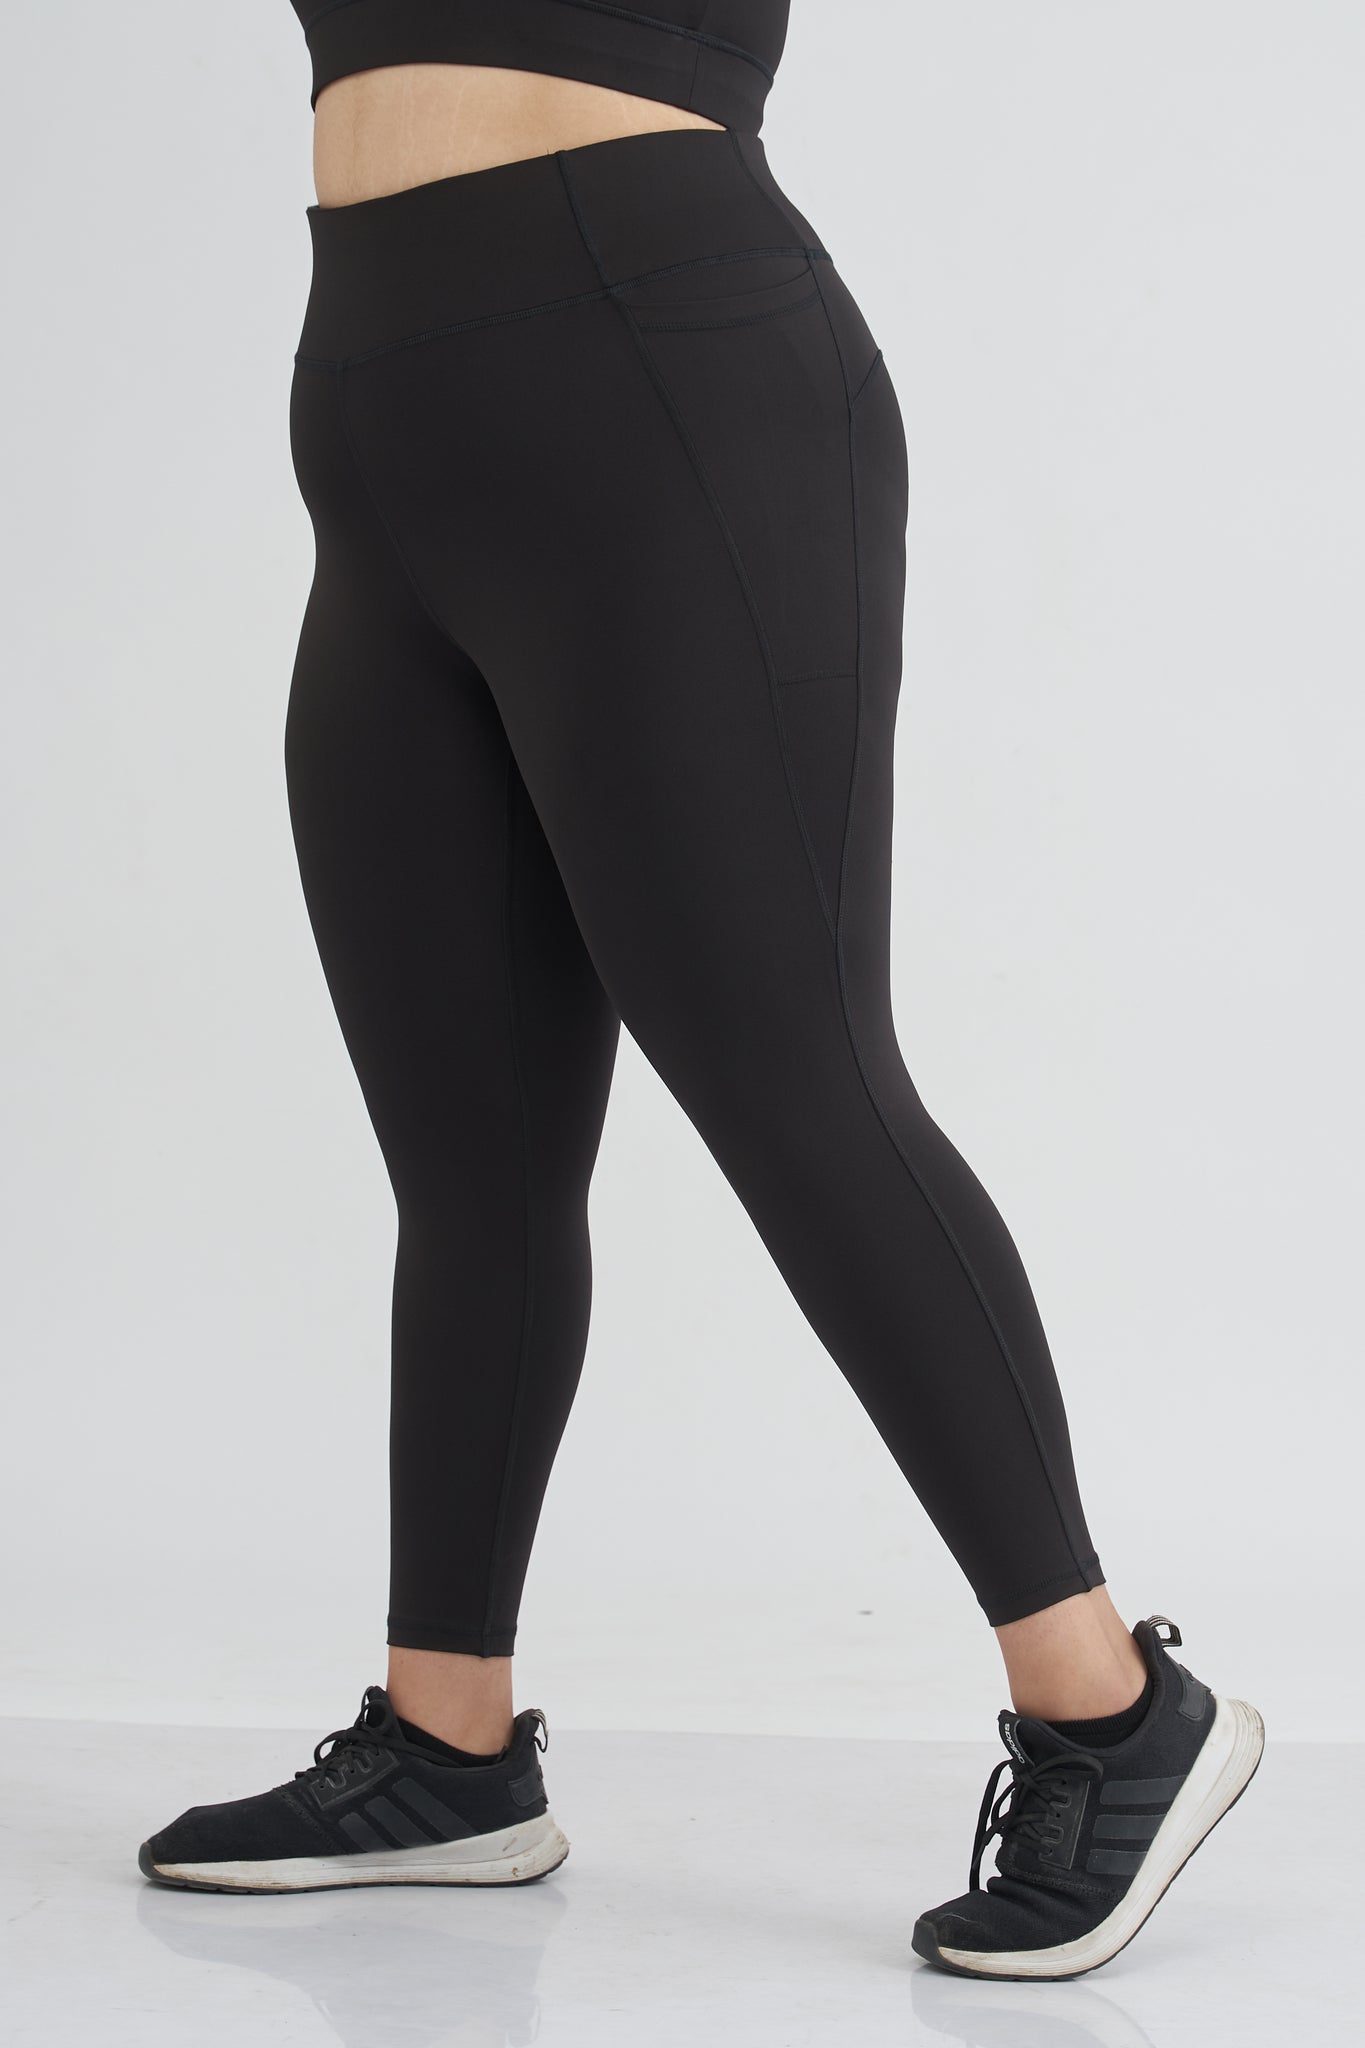 The Best Leggings for Every Body Type and Budget – Baleaf Sports